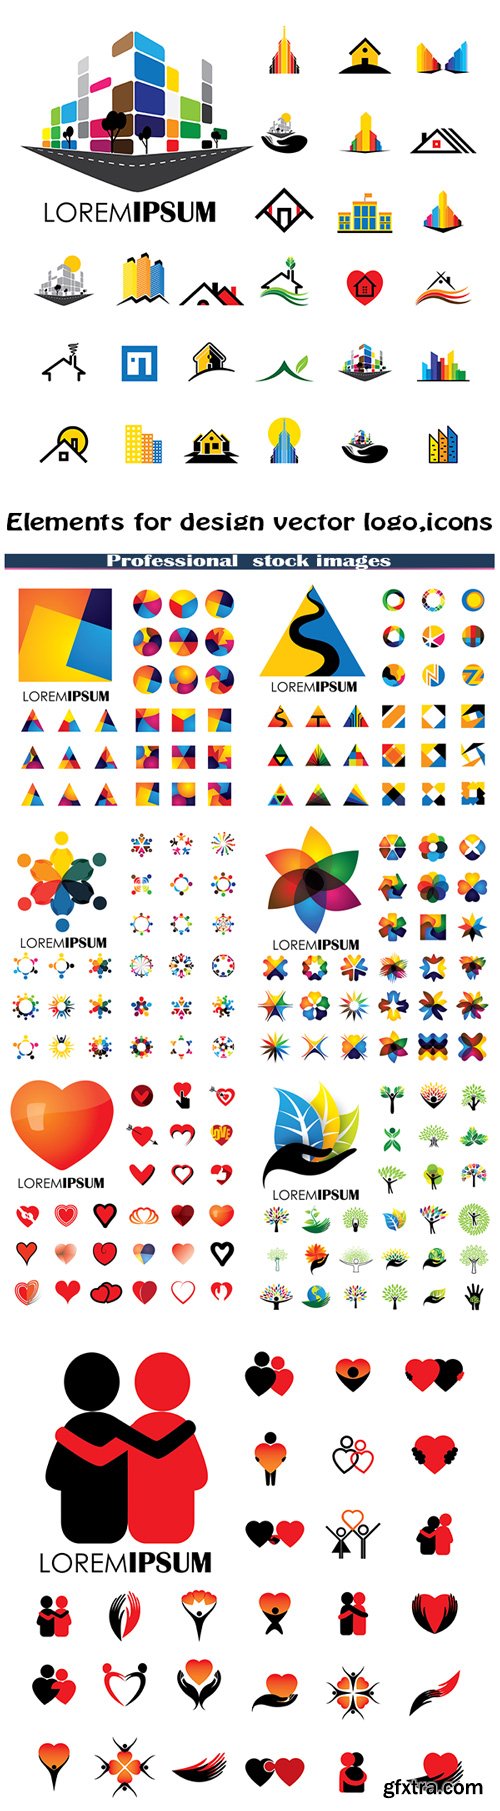 Elements for design vector logo,icons